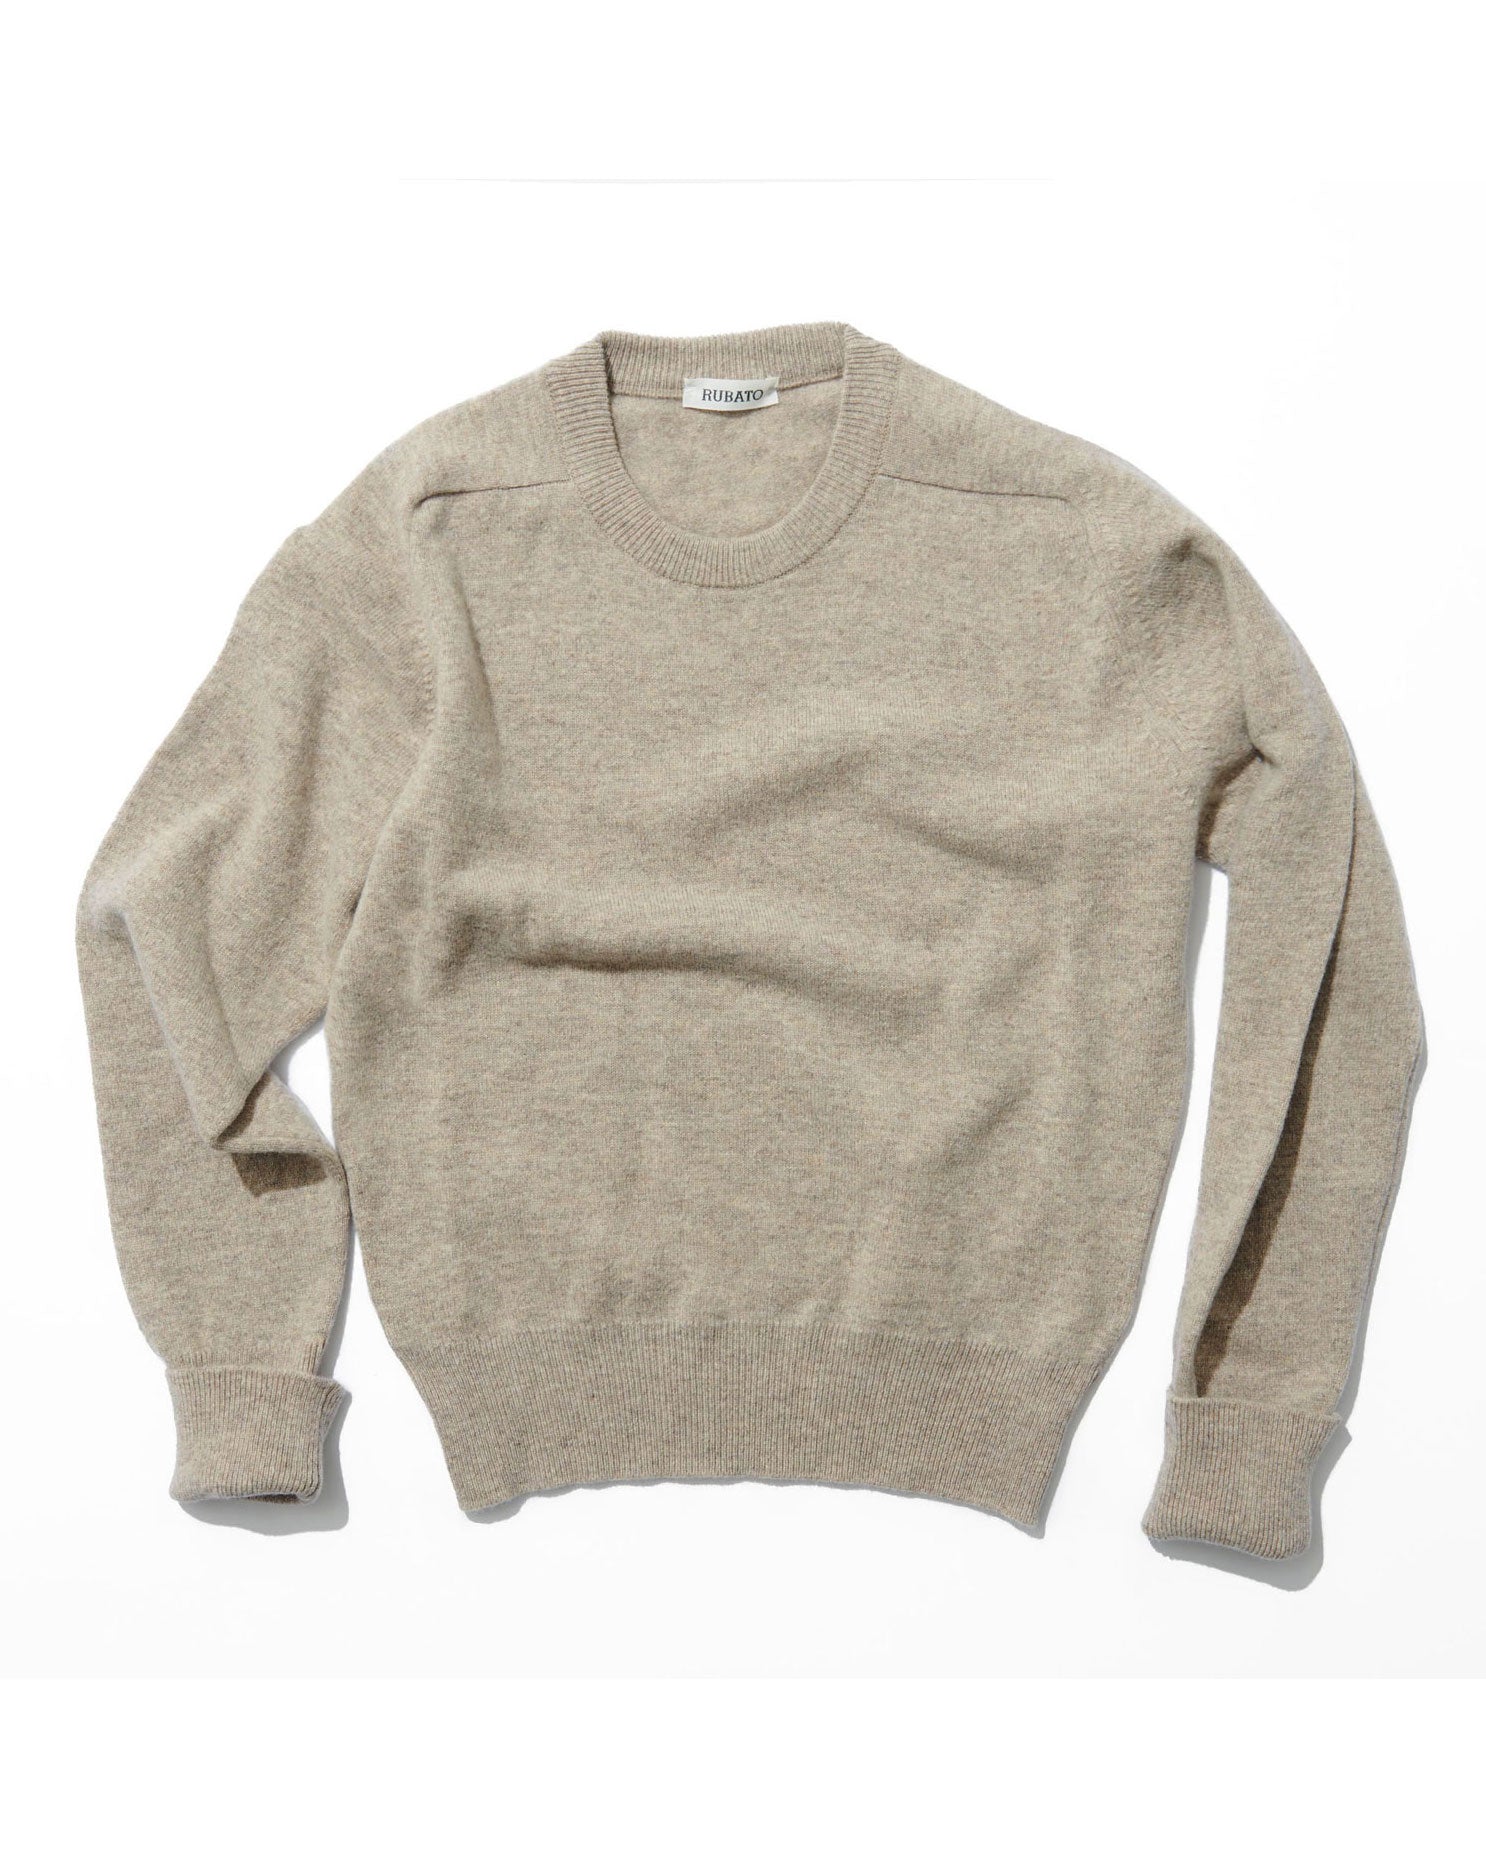 Standard Crew Neck in Fawn